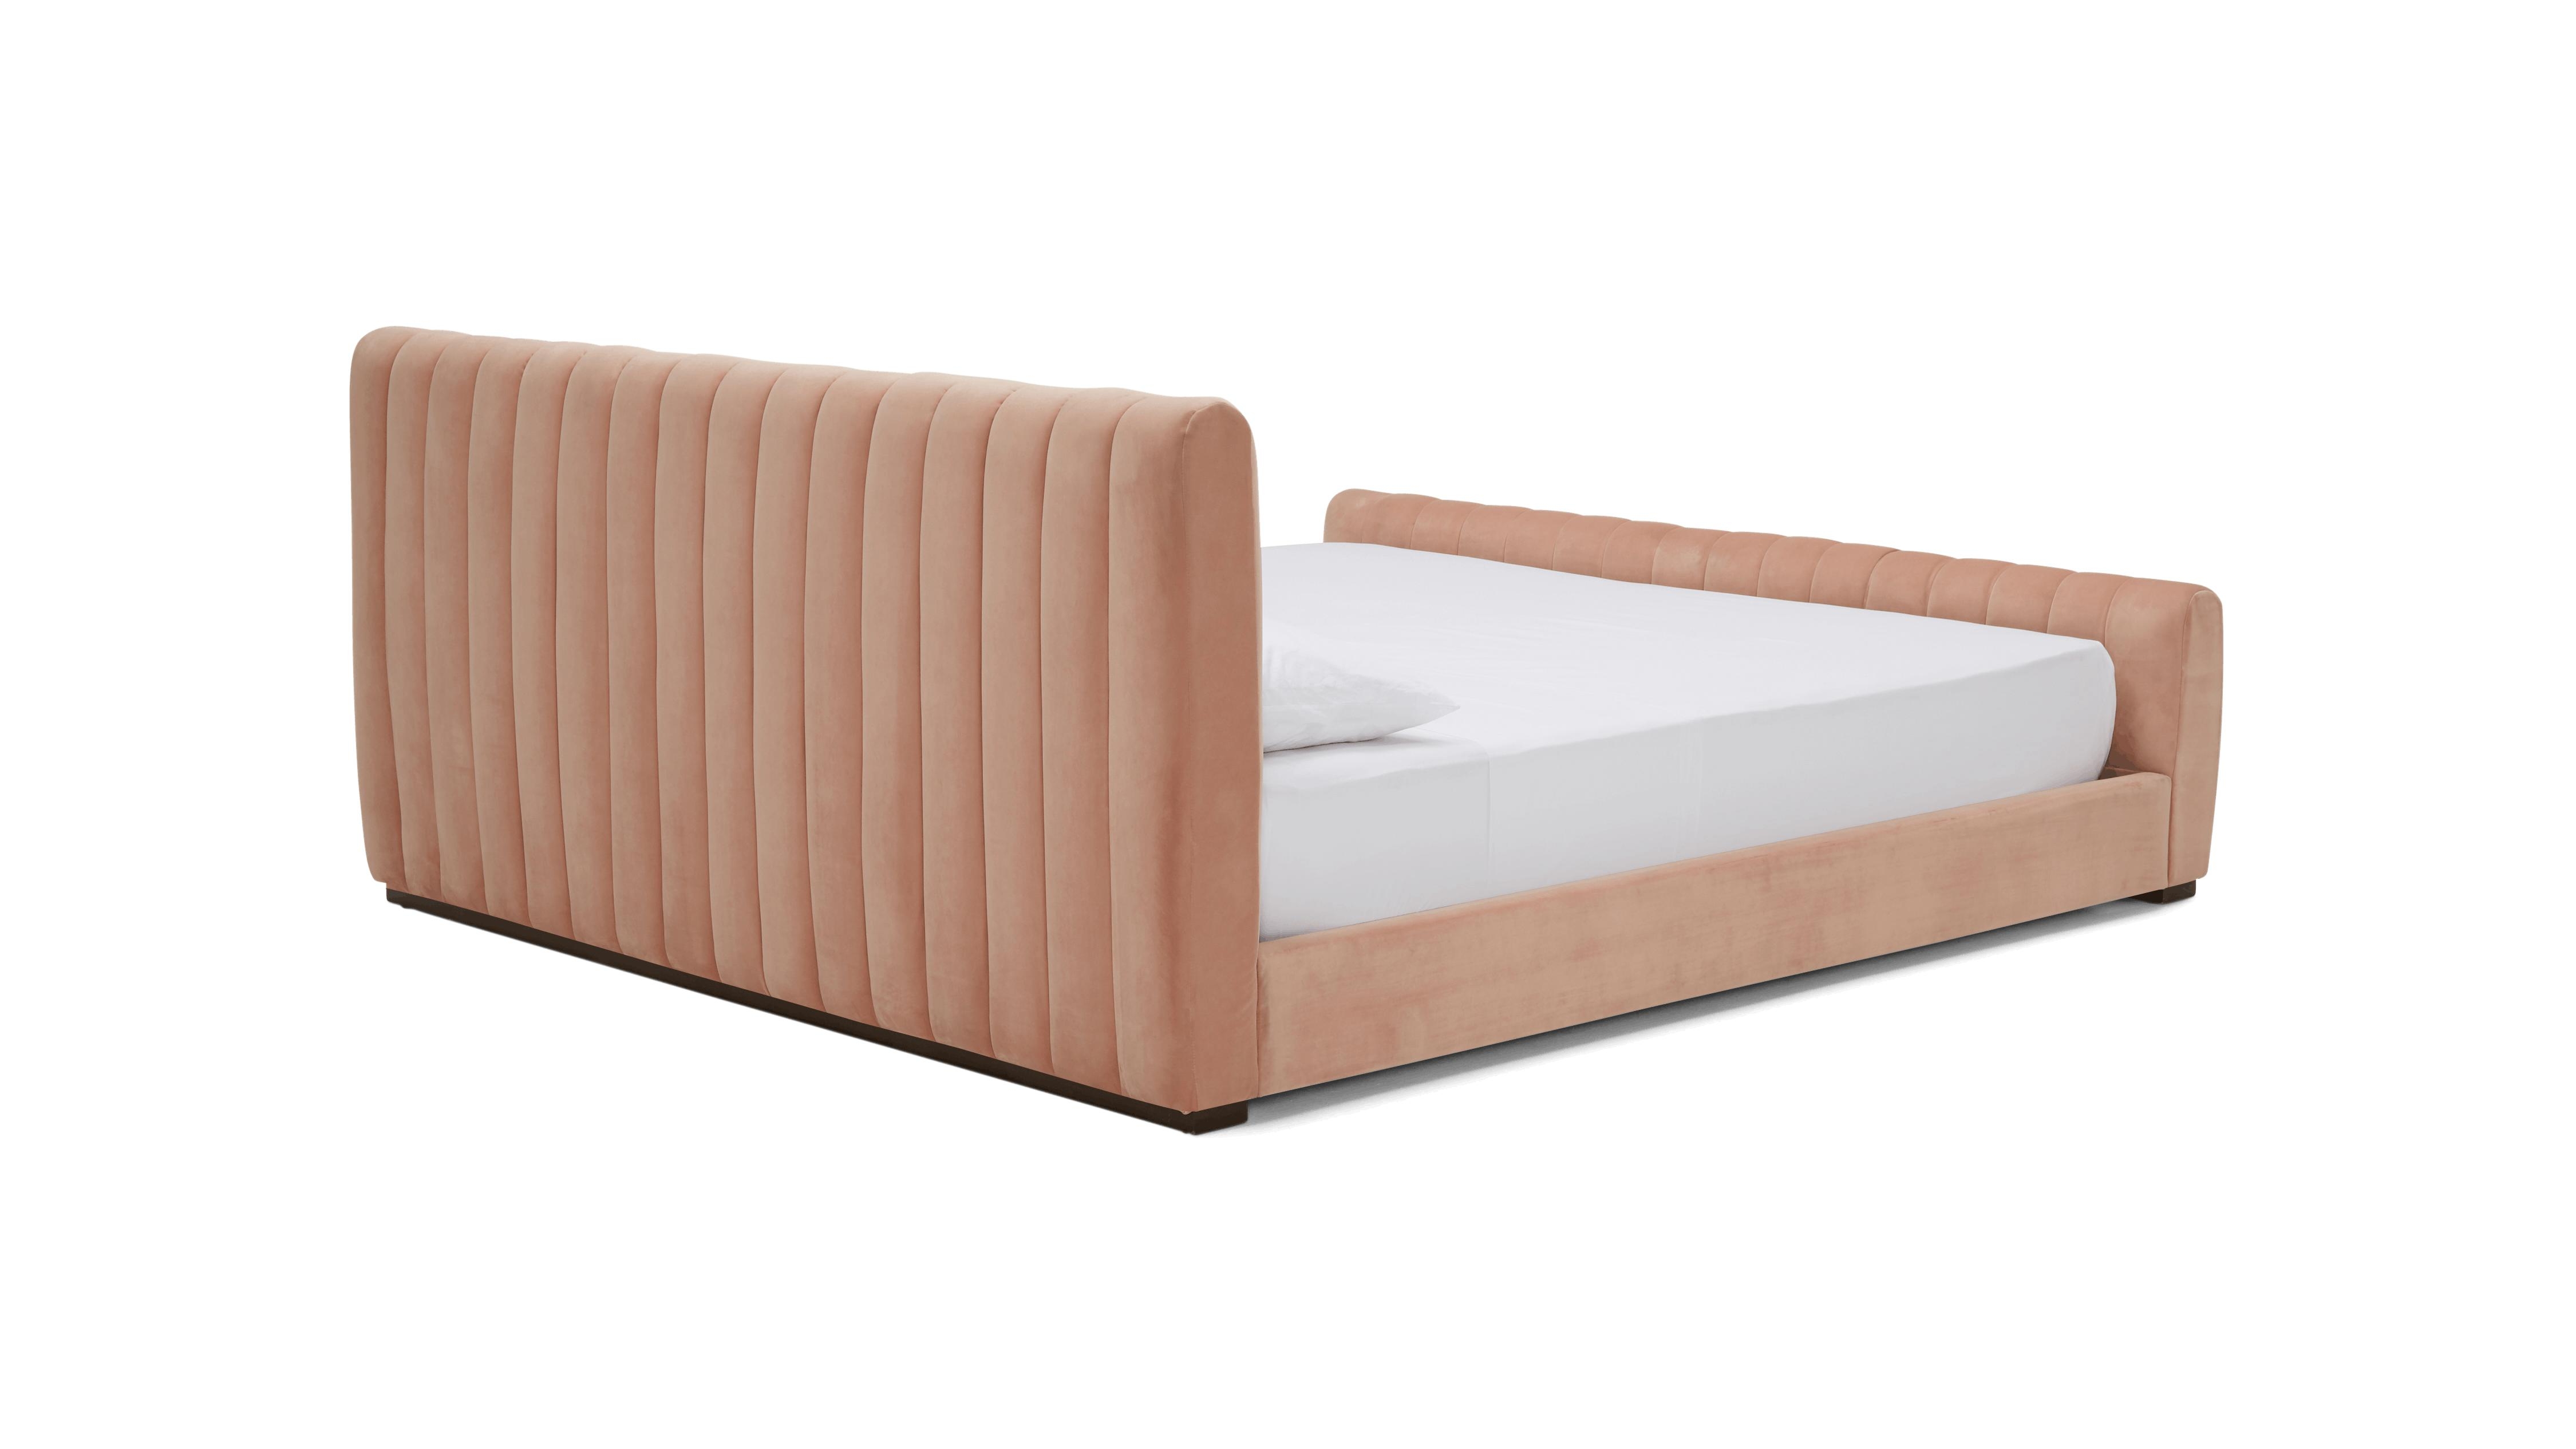 Pink Camille Mid Century Modern Bed - Royale Blush - Mocha - Cal King - Image 3